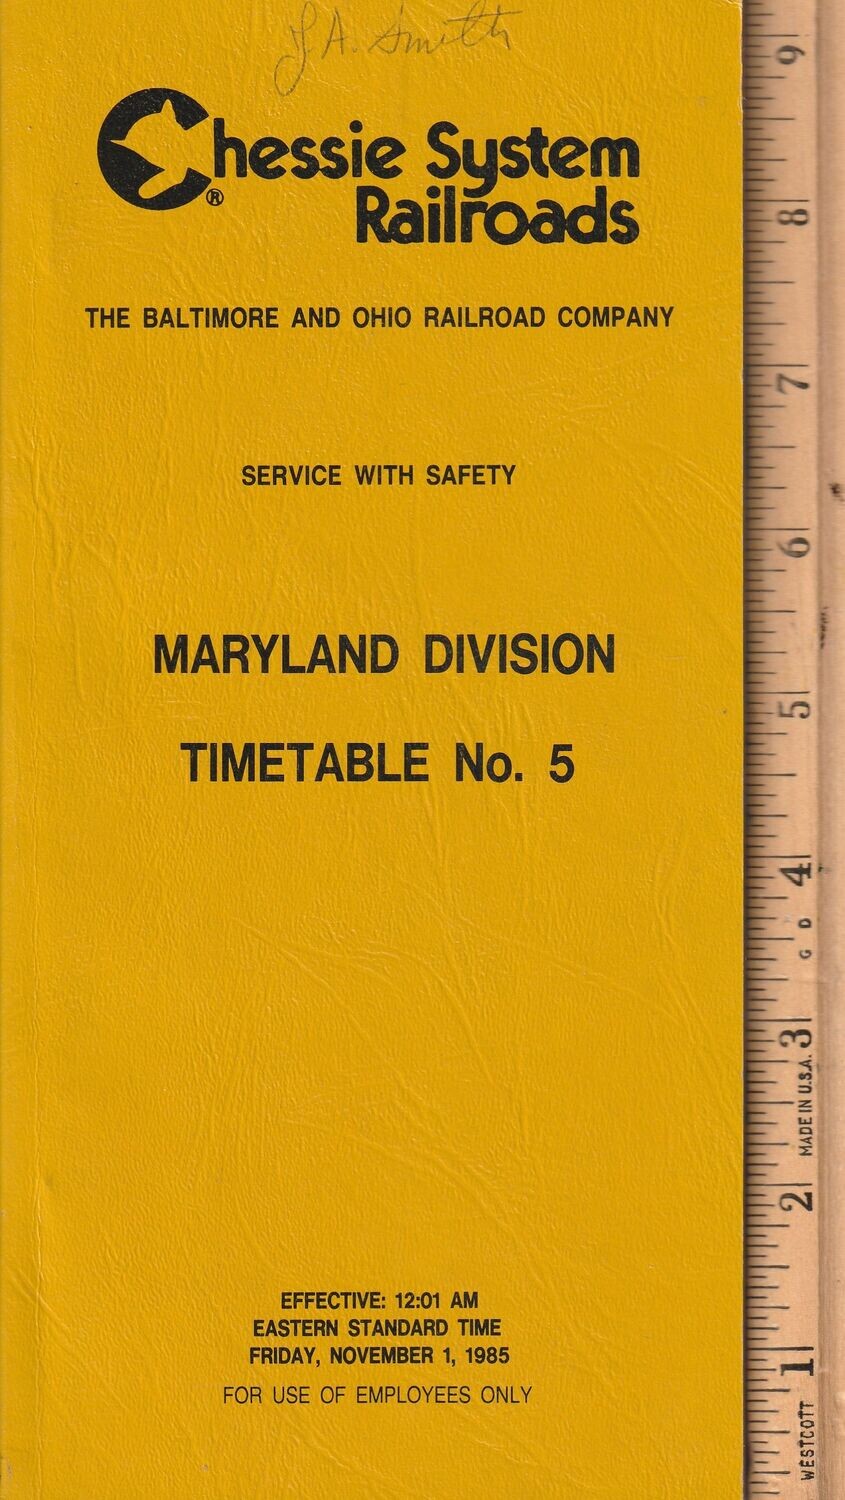 Chessie System Maryland Division 1985